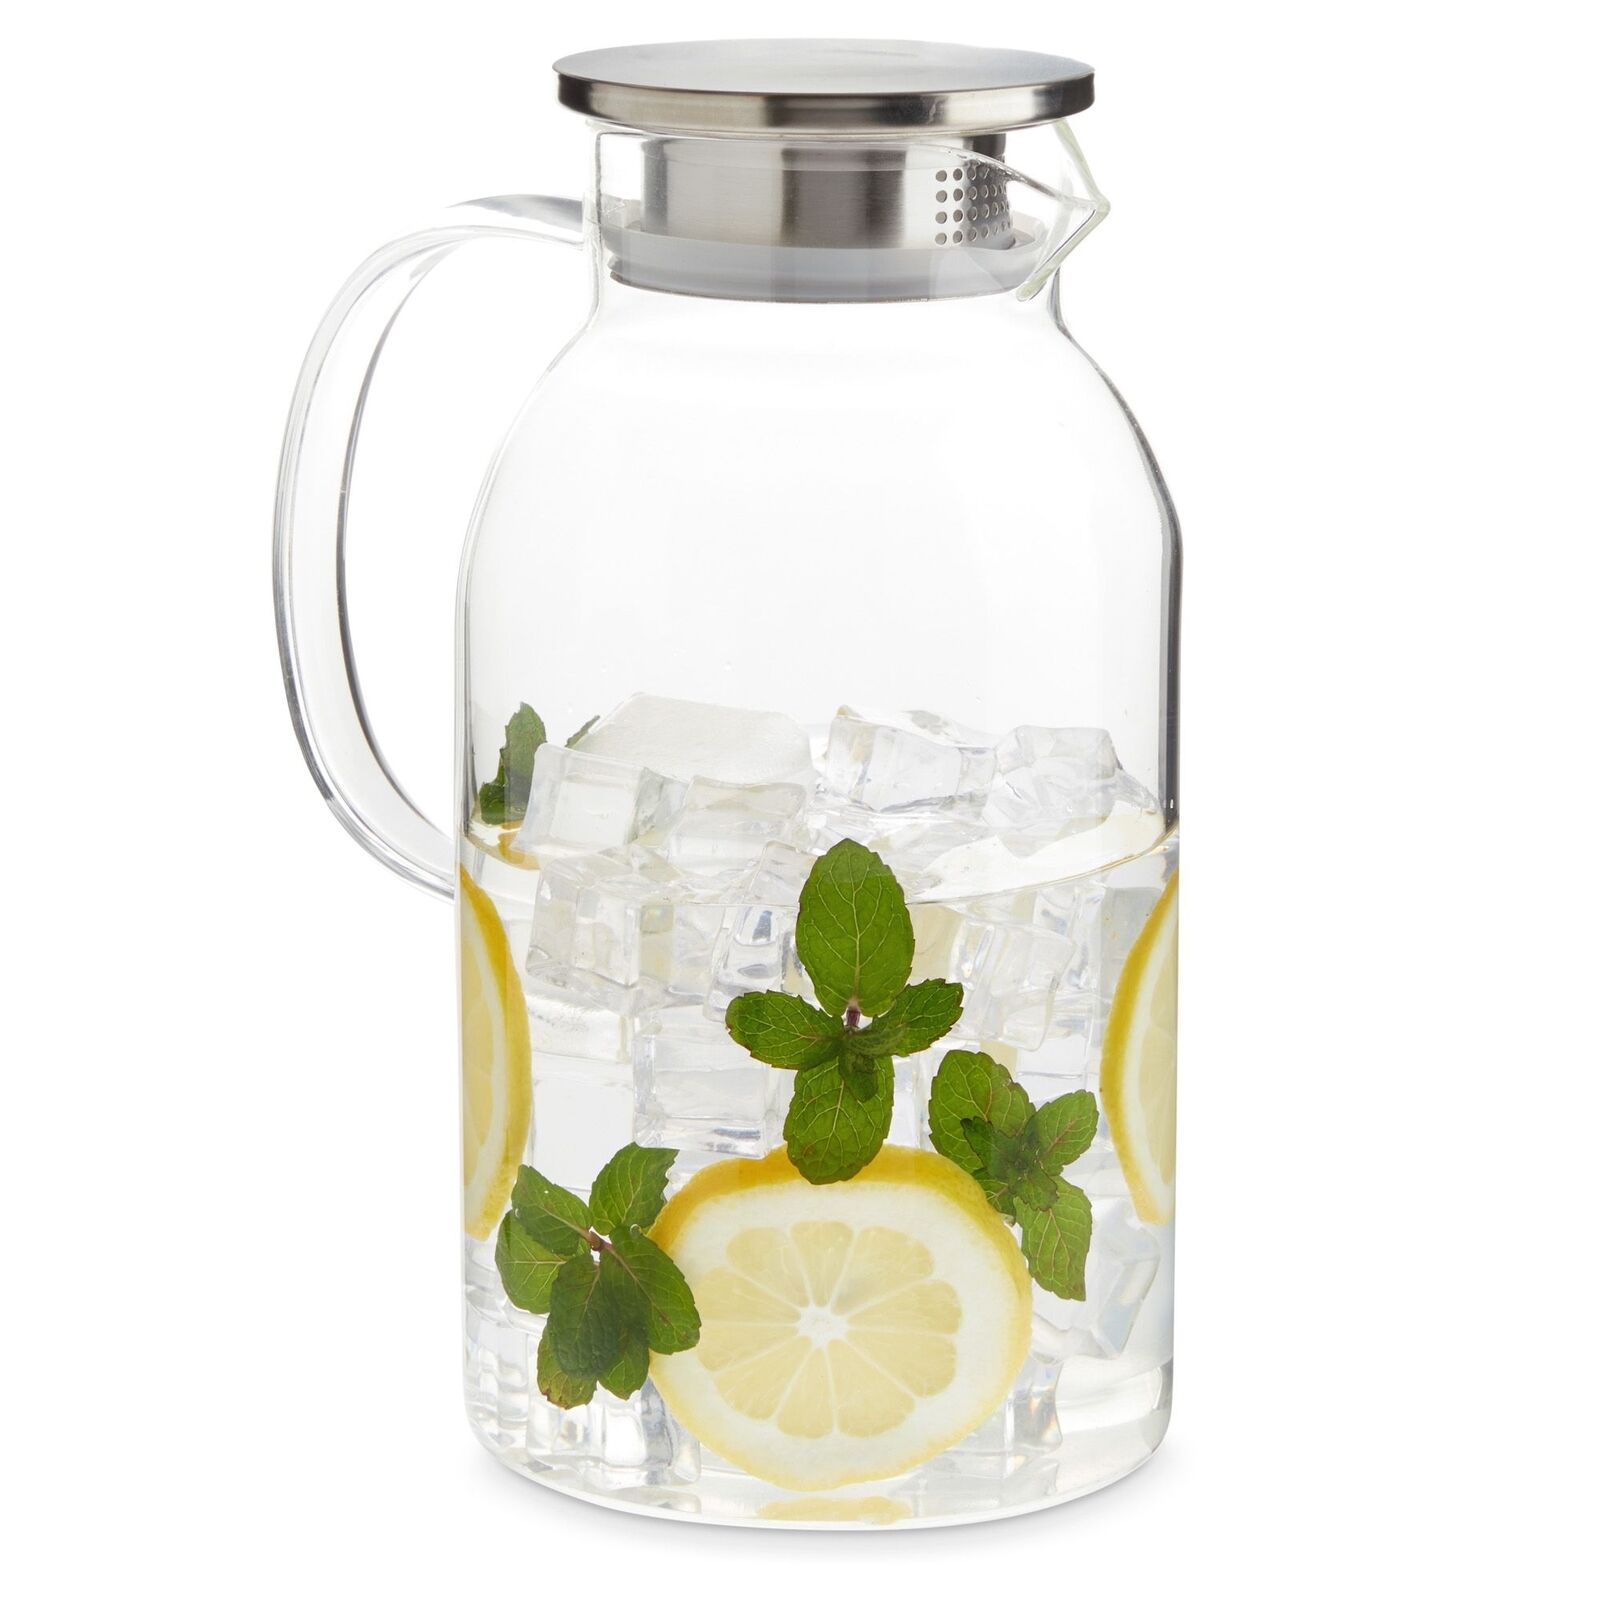 68 Oz / 2 Liter Glass Pitcher with Lid and Spout - Carafe for Water (Clear)